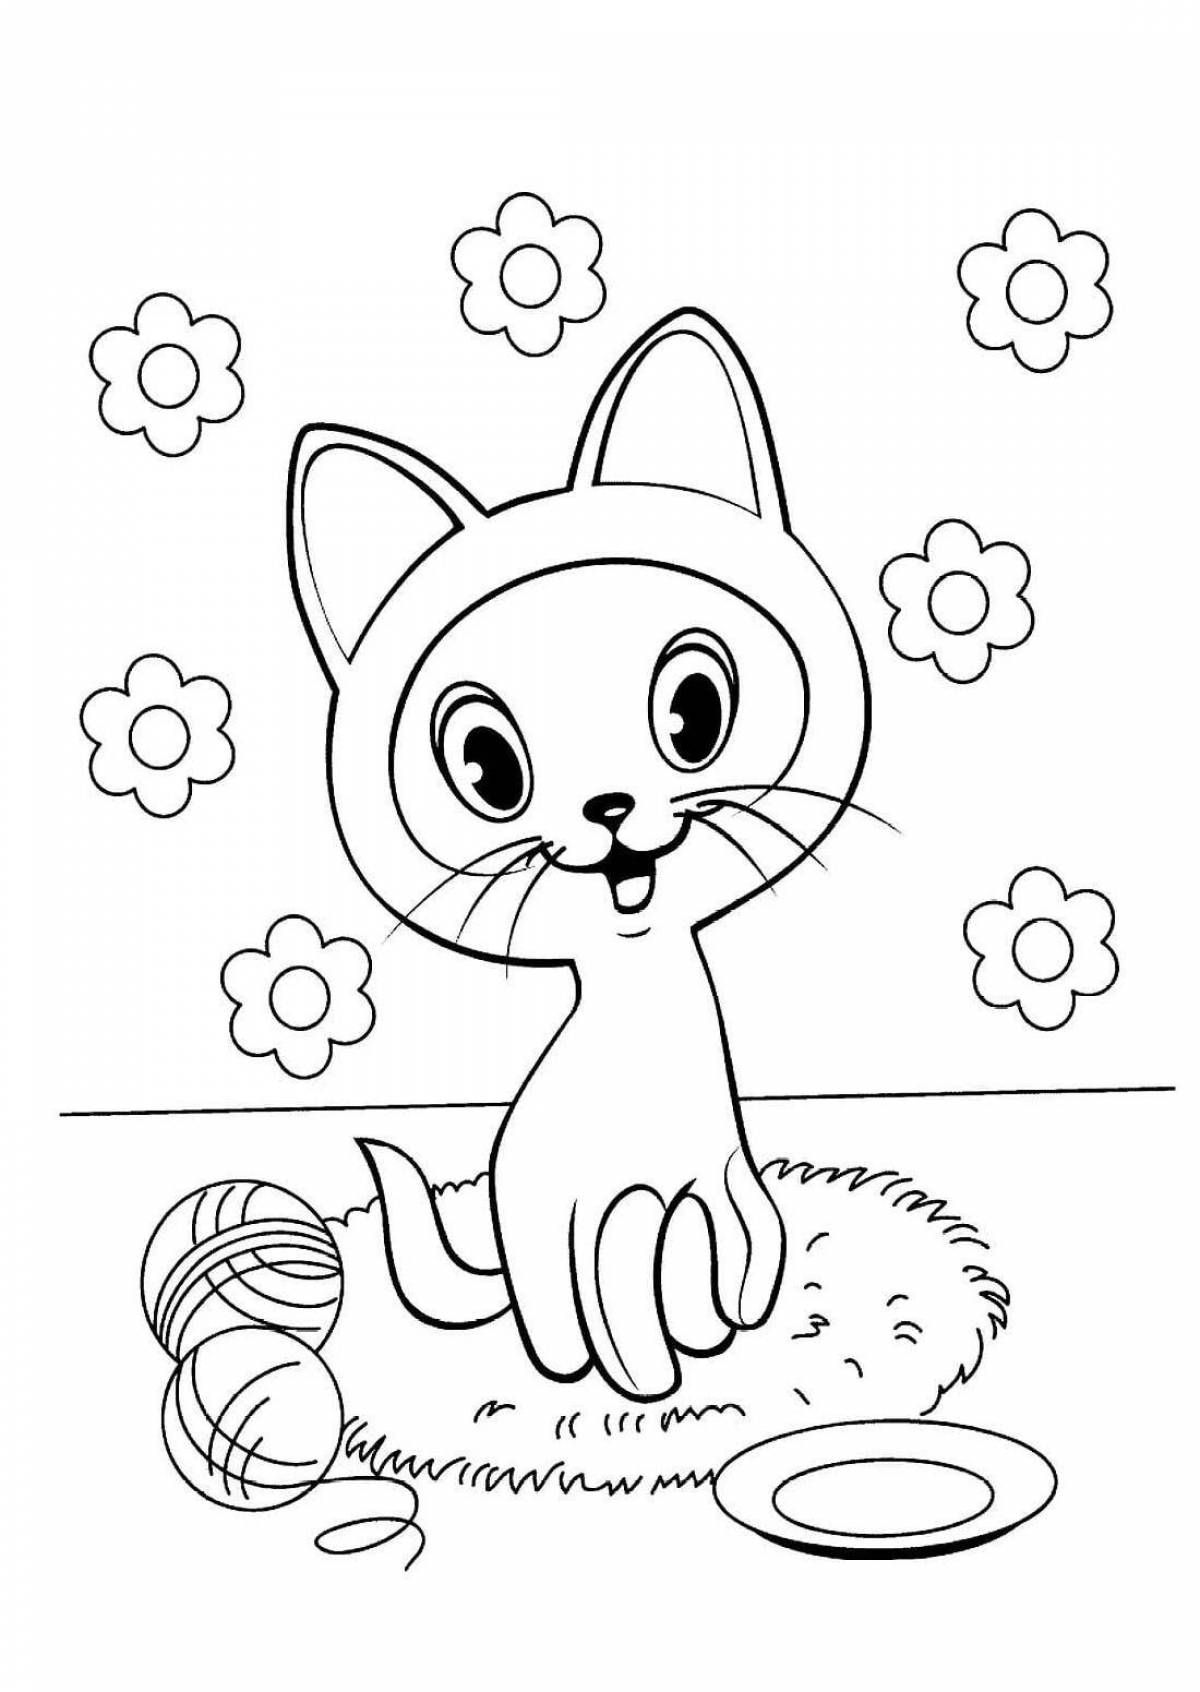 Colorful kitten coloring page